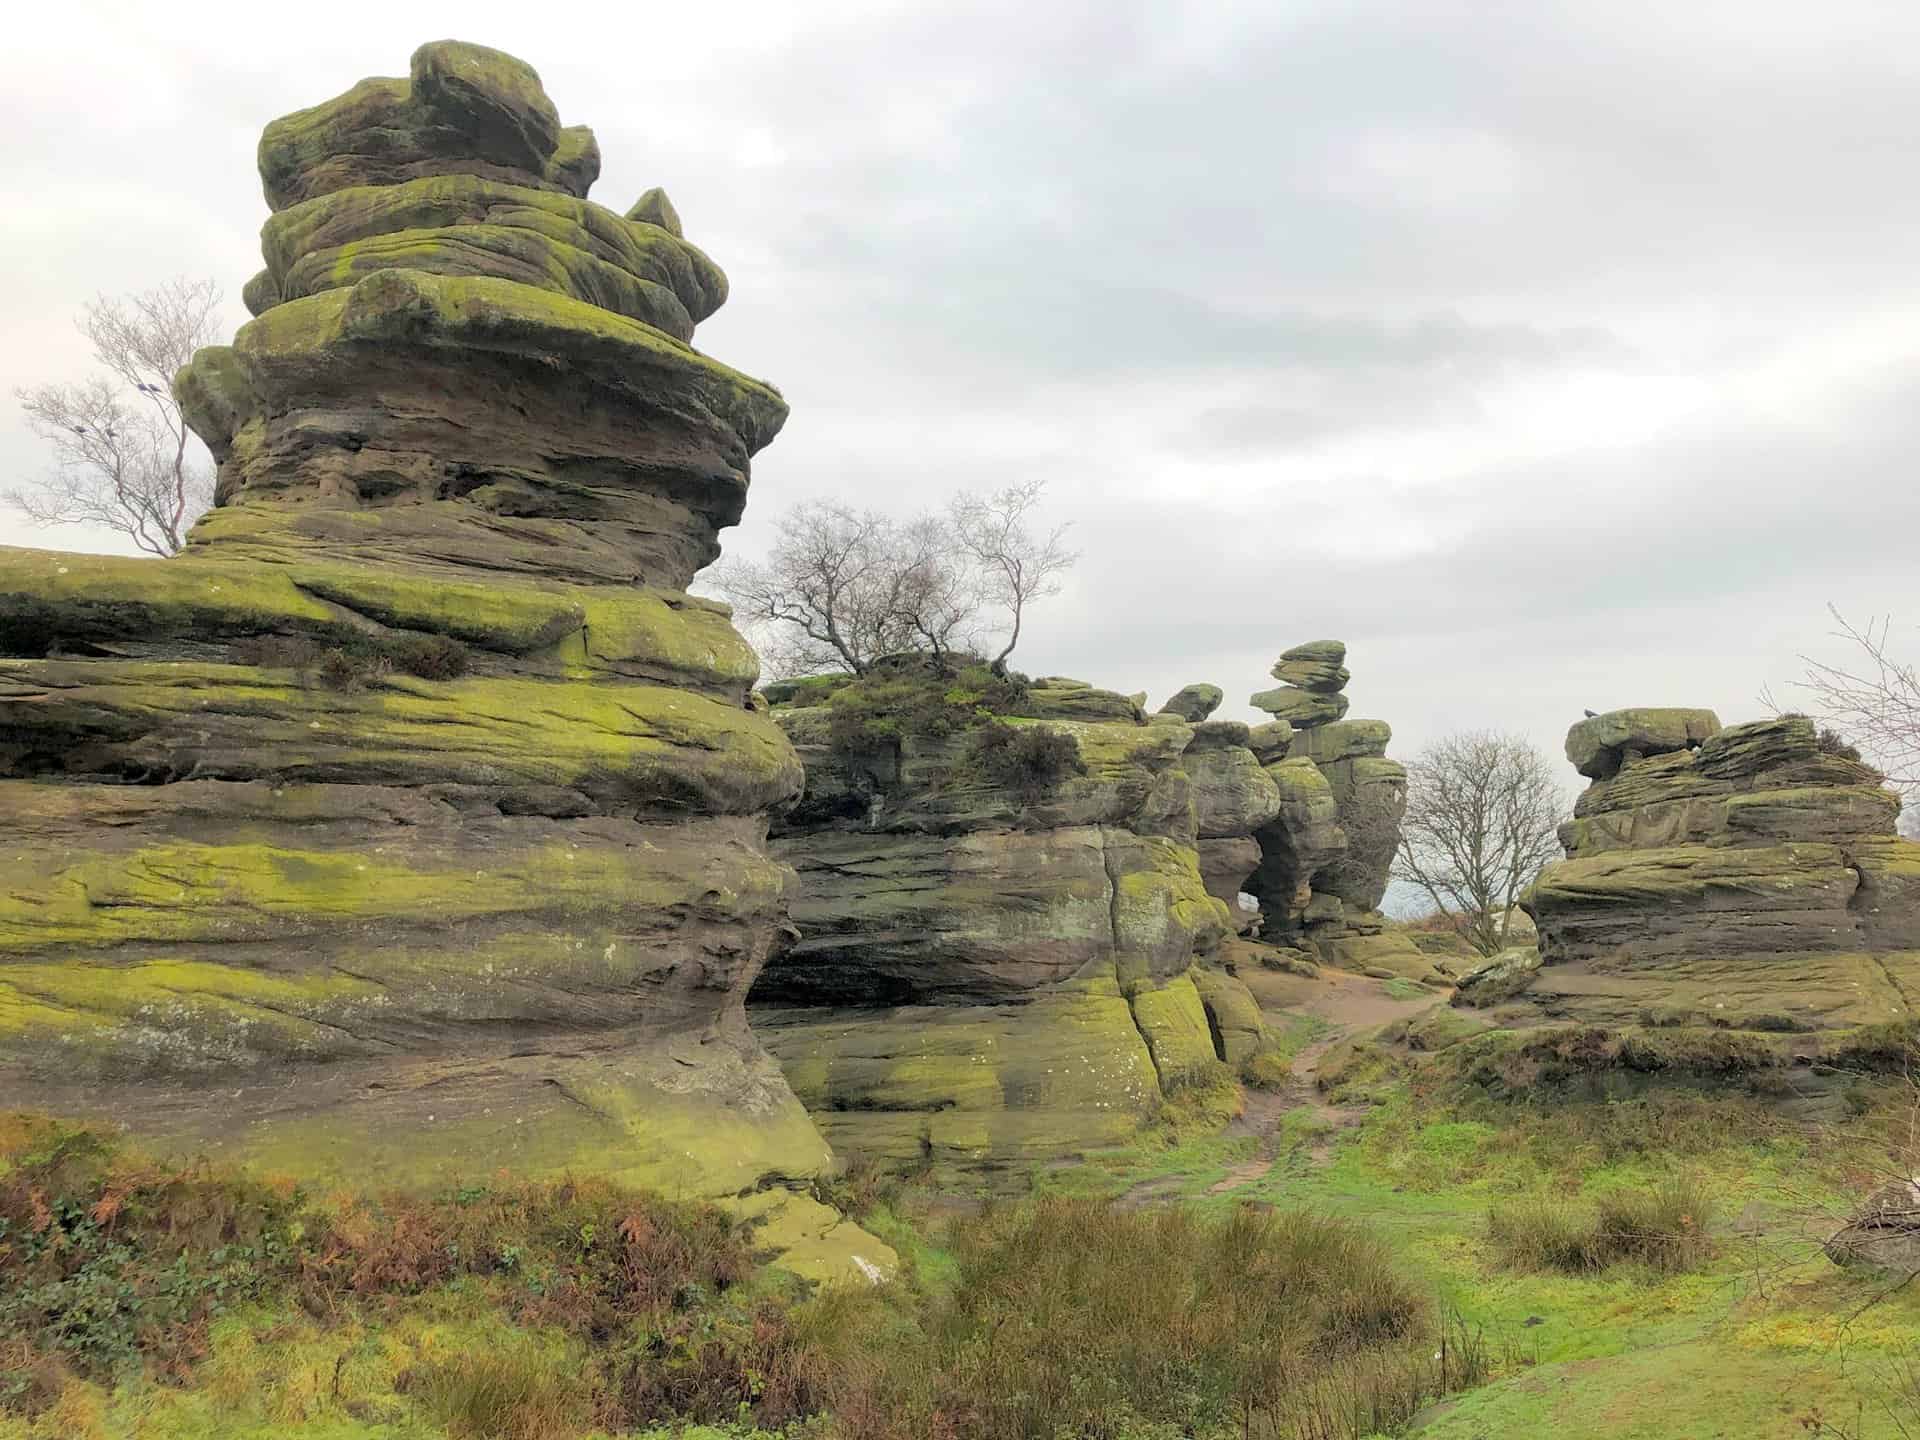 These formations, shaped by natural erosion, include distinct shapes like the Sphinx, the Watchdog, and the Dancing Bear, requiring imagination and perspective to appreciate.